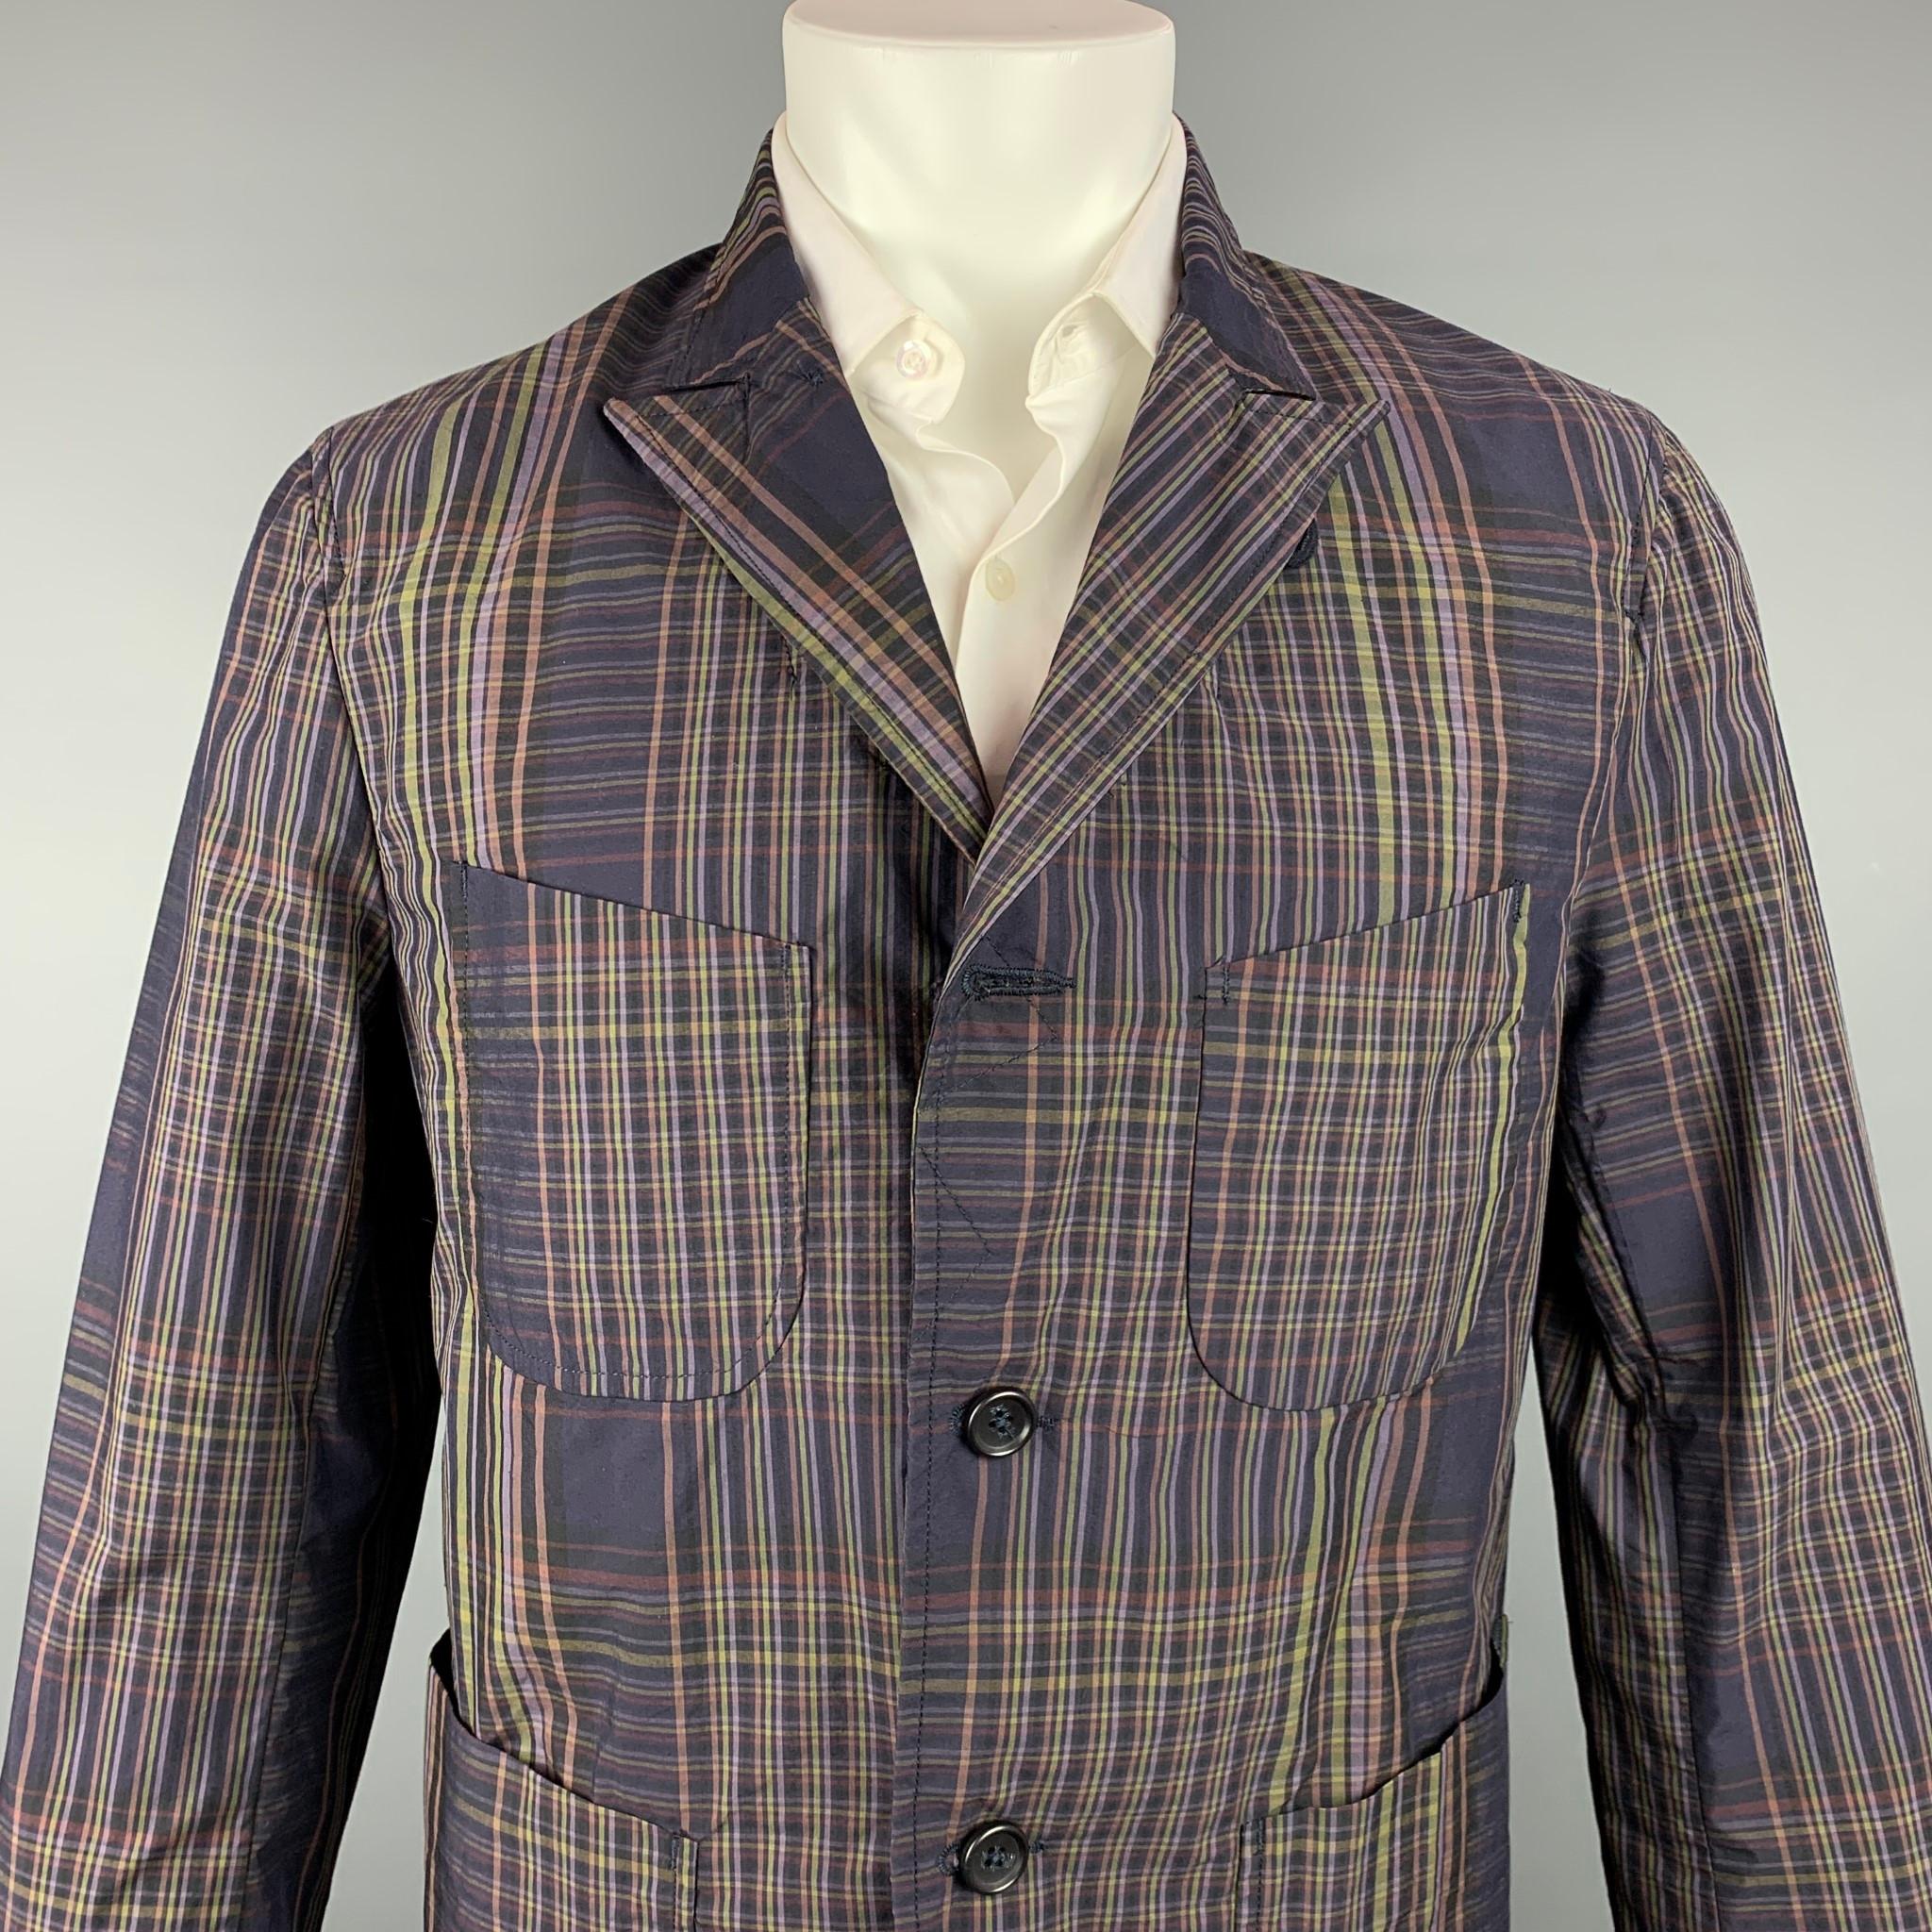 ENGINEERED GARMENTS sport coat comes in a brown & olive plaid cotton with no liner featuring a peak lapel, patch pockets, and a three button closure.

Vey Good Pre-Owned Condition.
Marked: M

Measurements:

Shoulder: 17.5 in.
Chest: 40 in.
Sleeve: